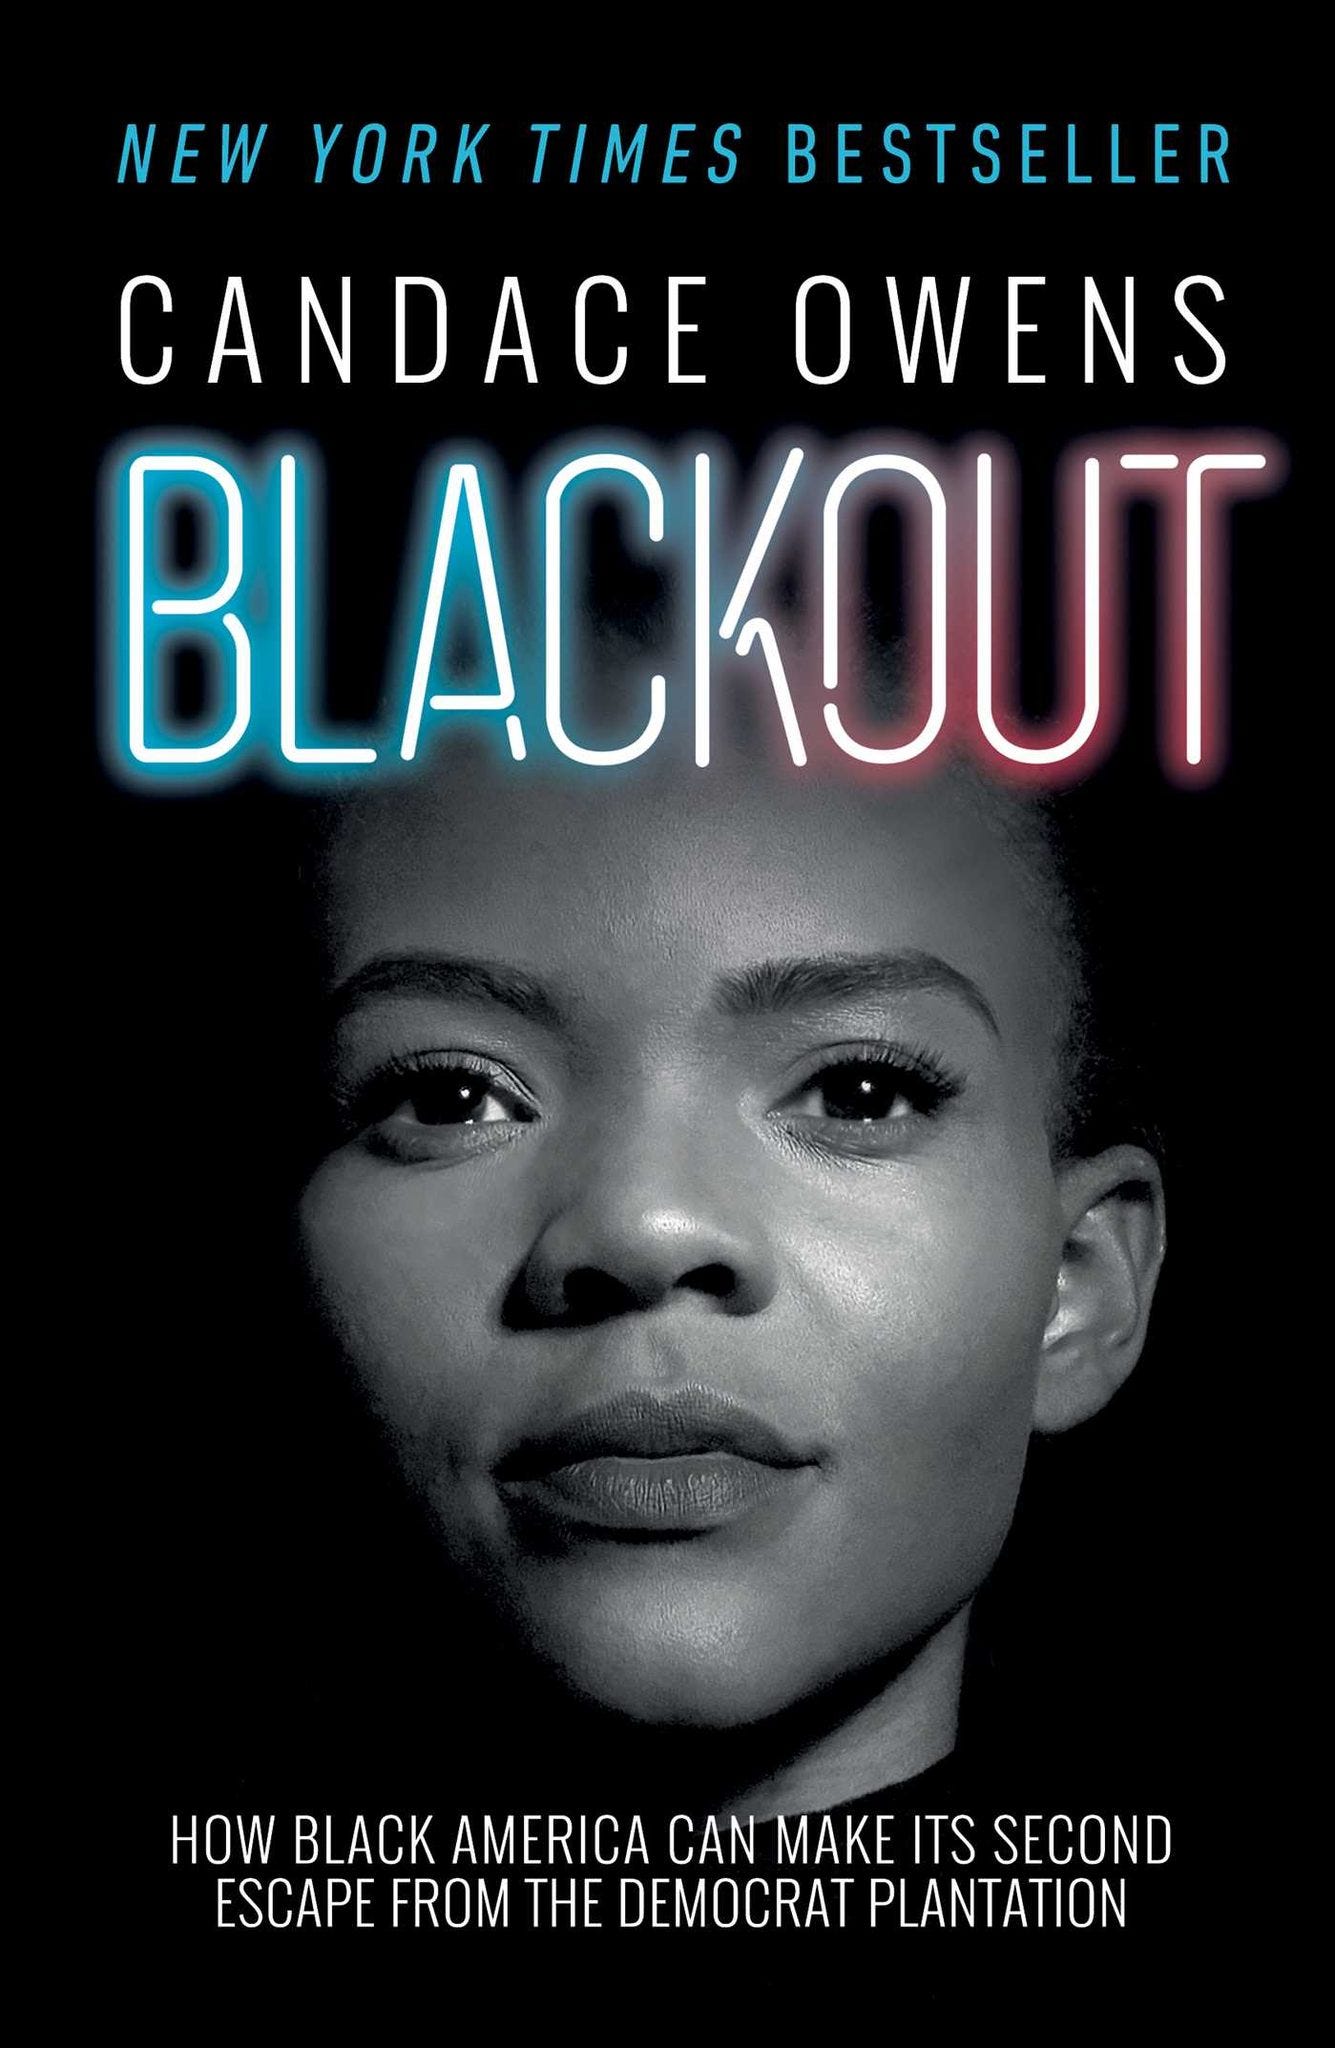 May be an image of 1 person and text that says 'NEW YORK TIMES BESTSELLER CANDACE OWENS BLACKOUT HOW AMERICA CAN MAKE ITS SECOND ESCAPE FROM THE DEMOCRAT PLANTATION'